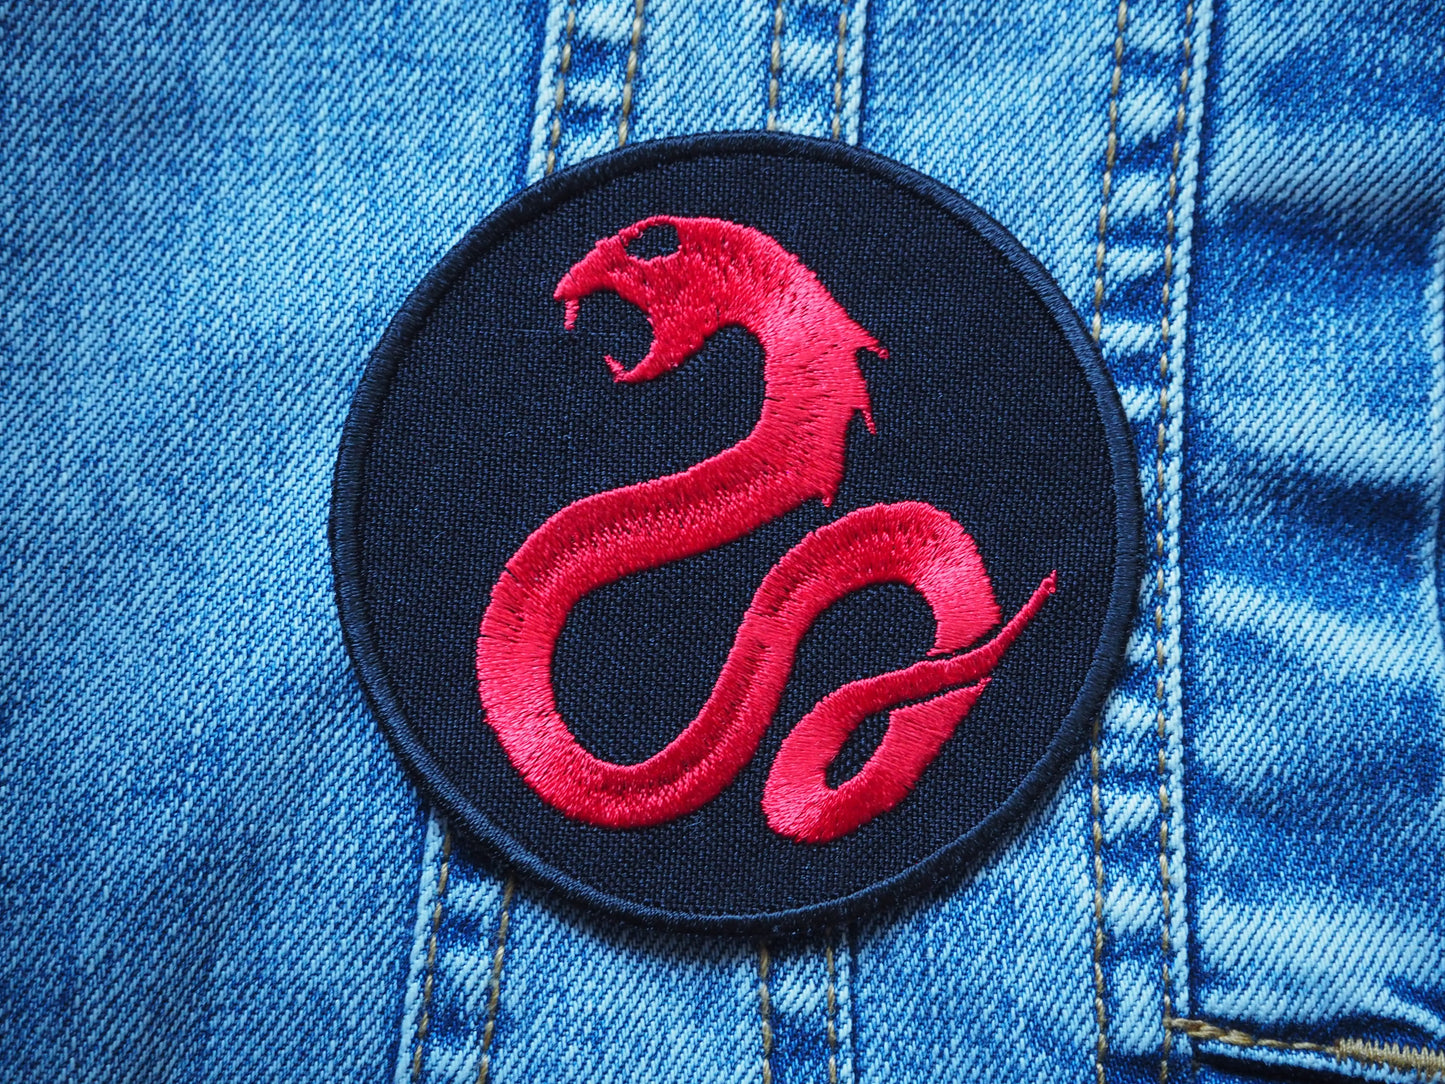 Haradrim Snake Dragon Embroidered Patch